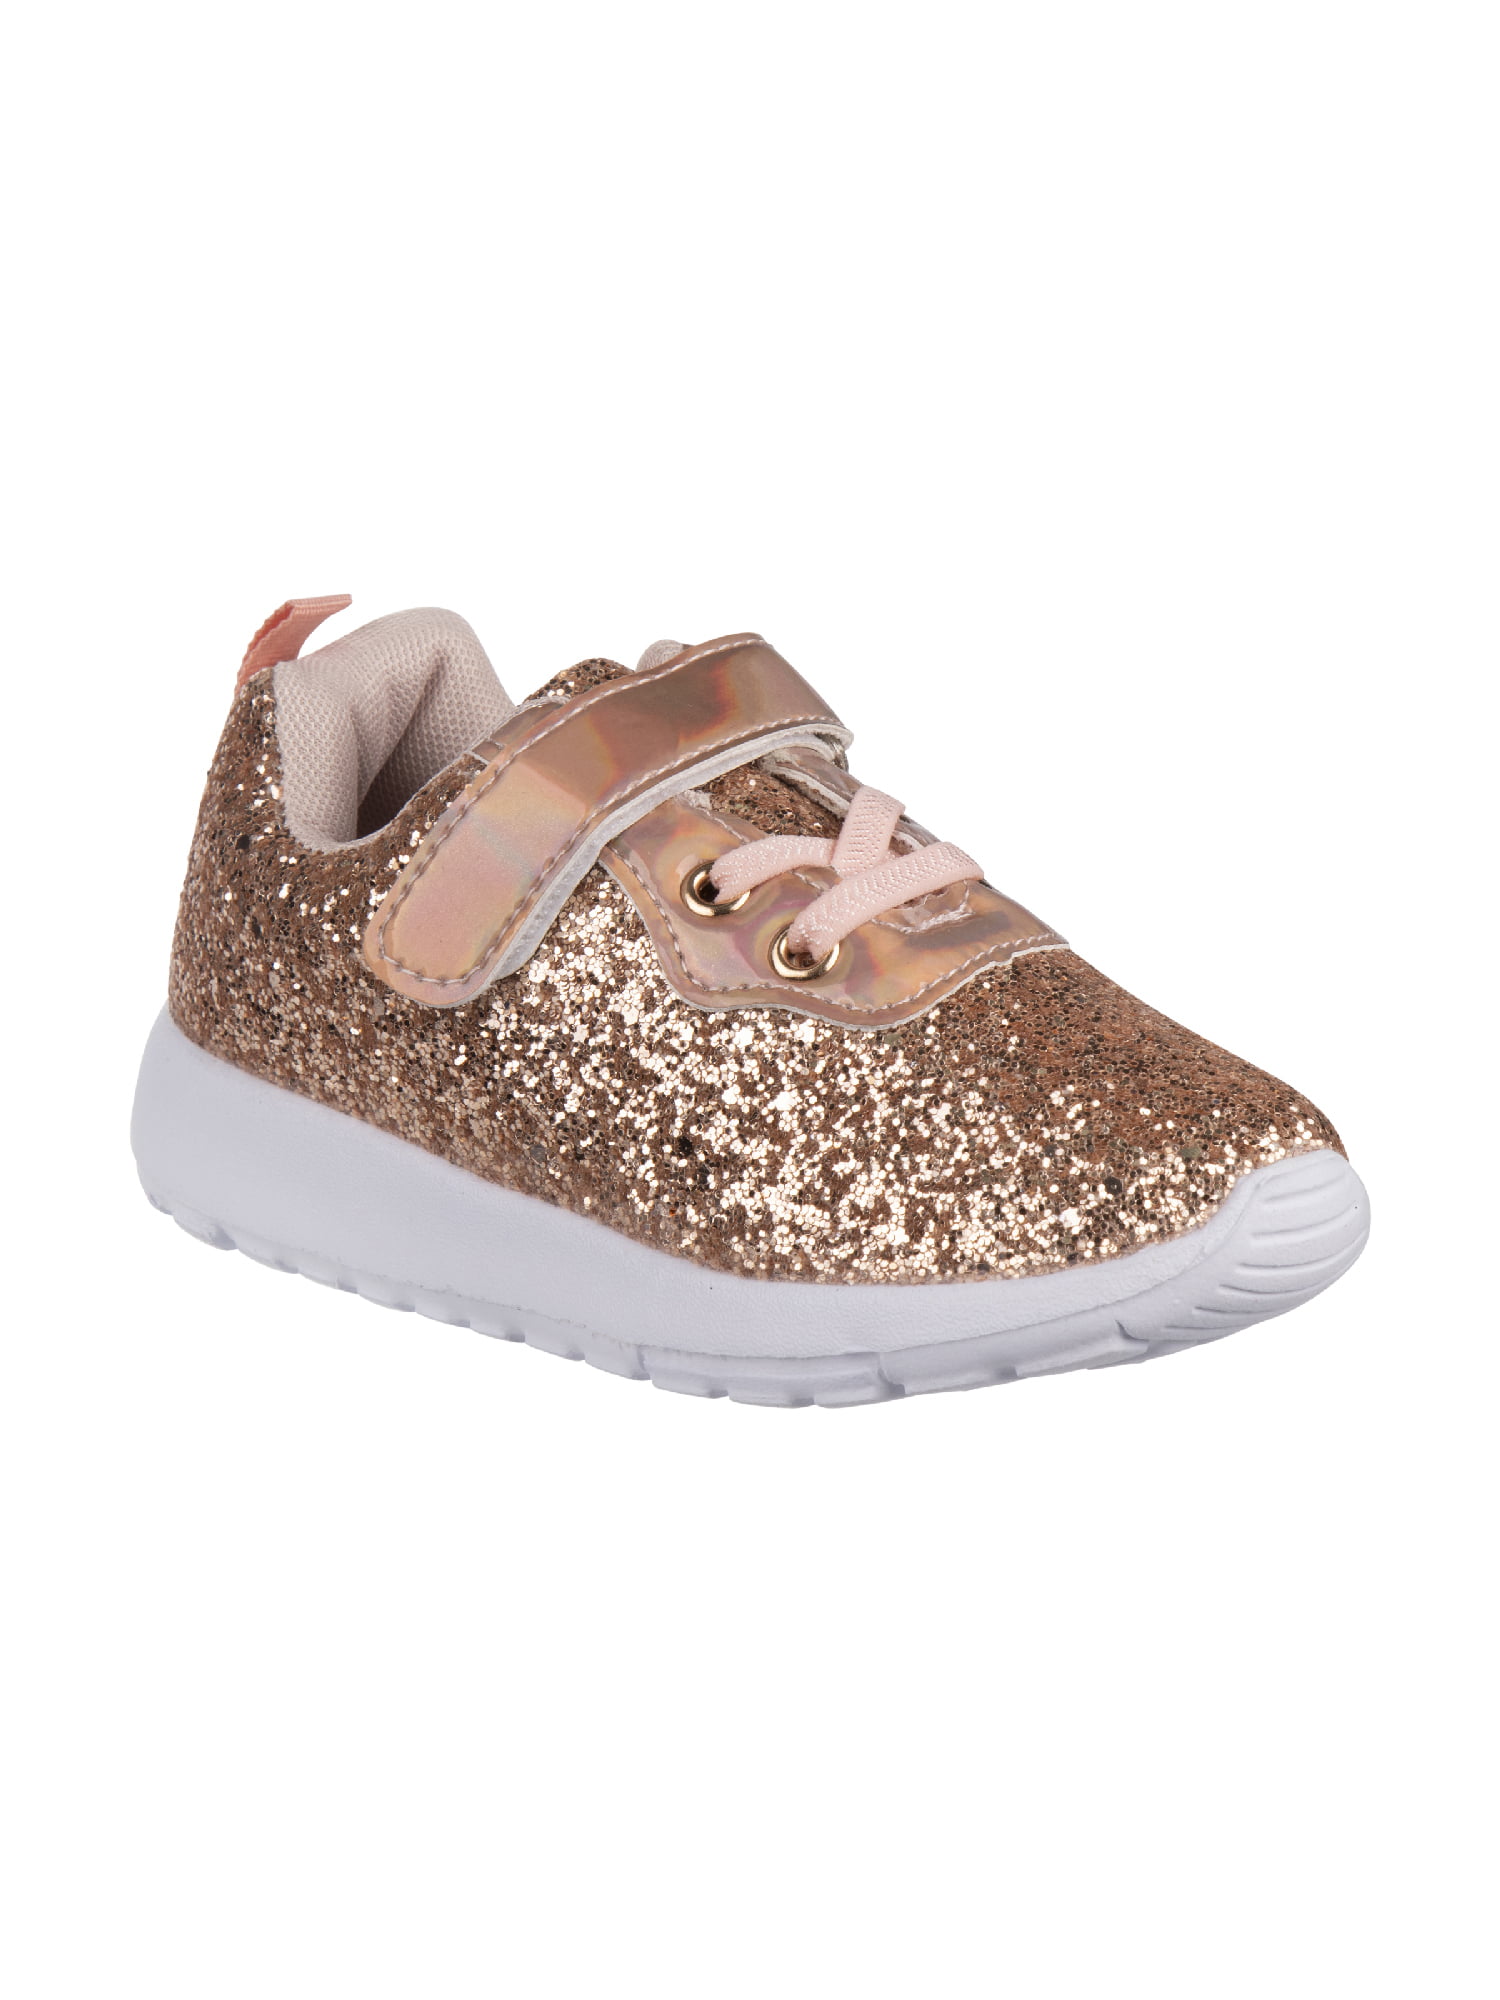 LUCKY STEP Toddler/Little Kid Girls Fashion Sneaker Cute Glitter Dual Hook and Loops Loafers Flats Shoes 